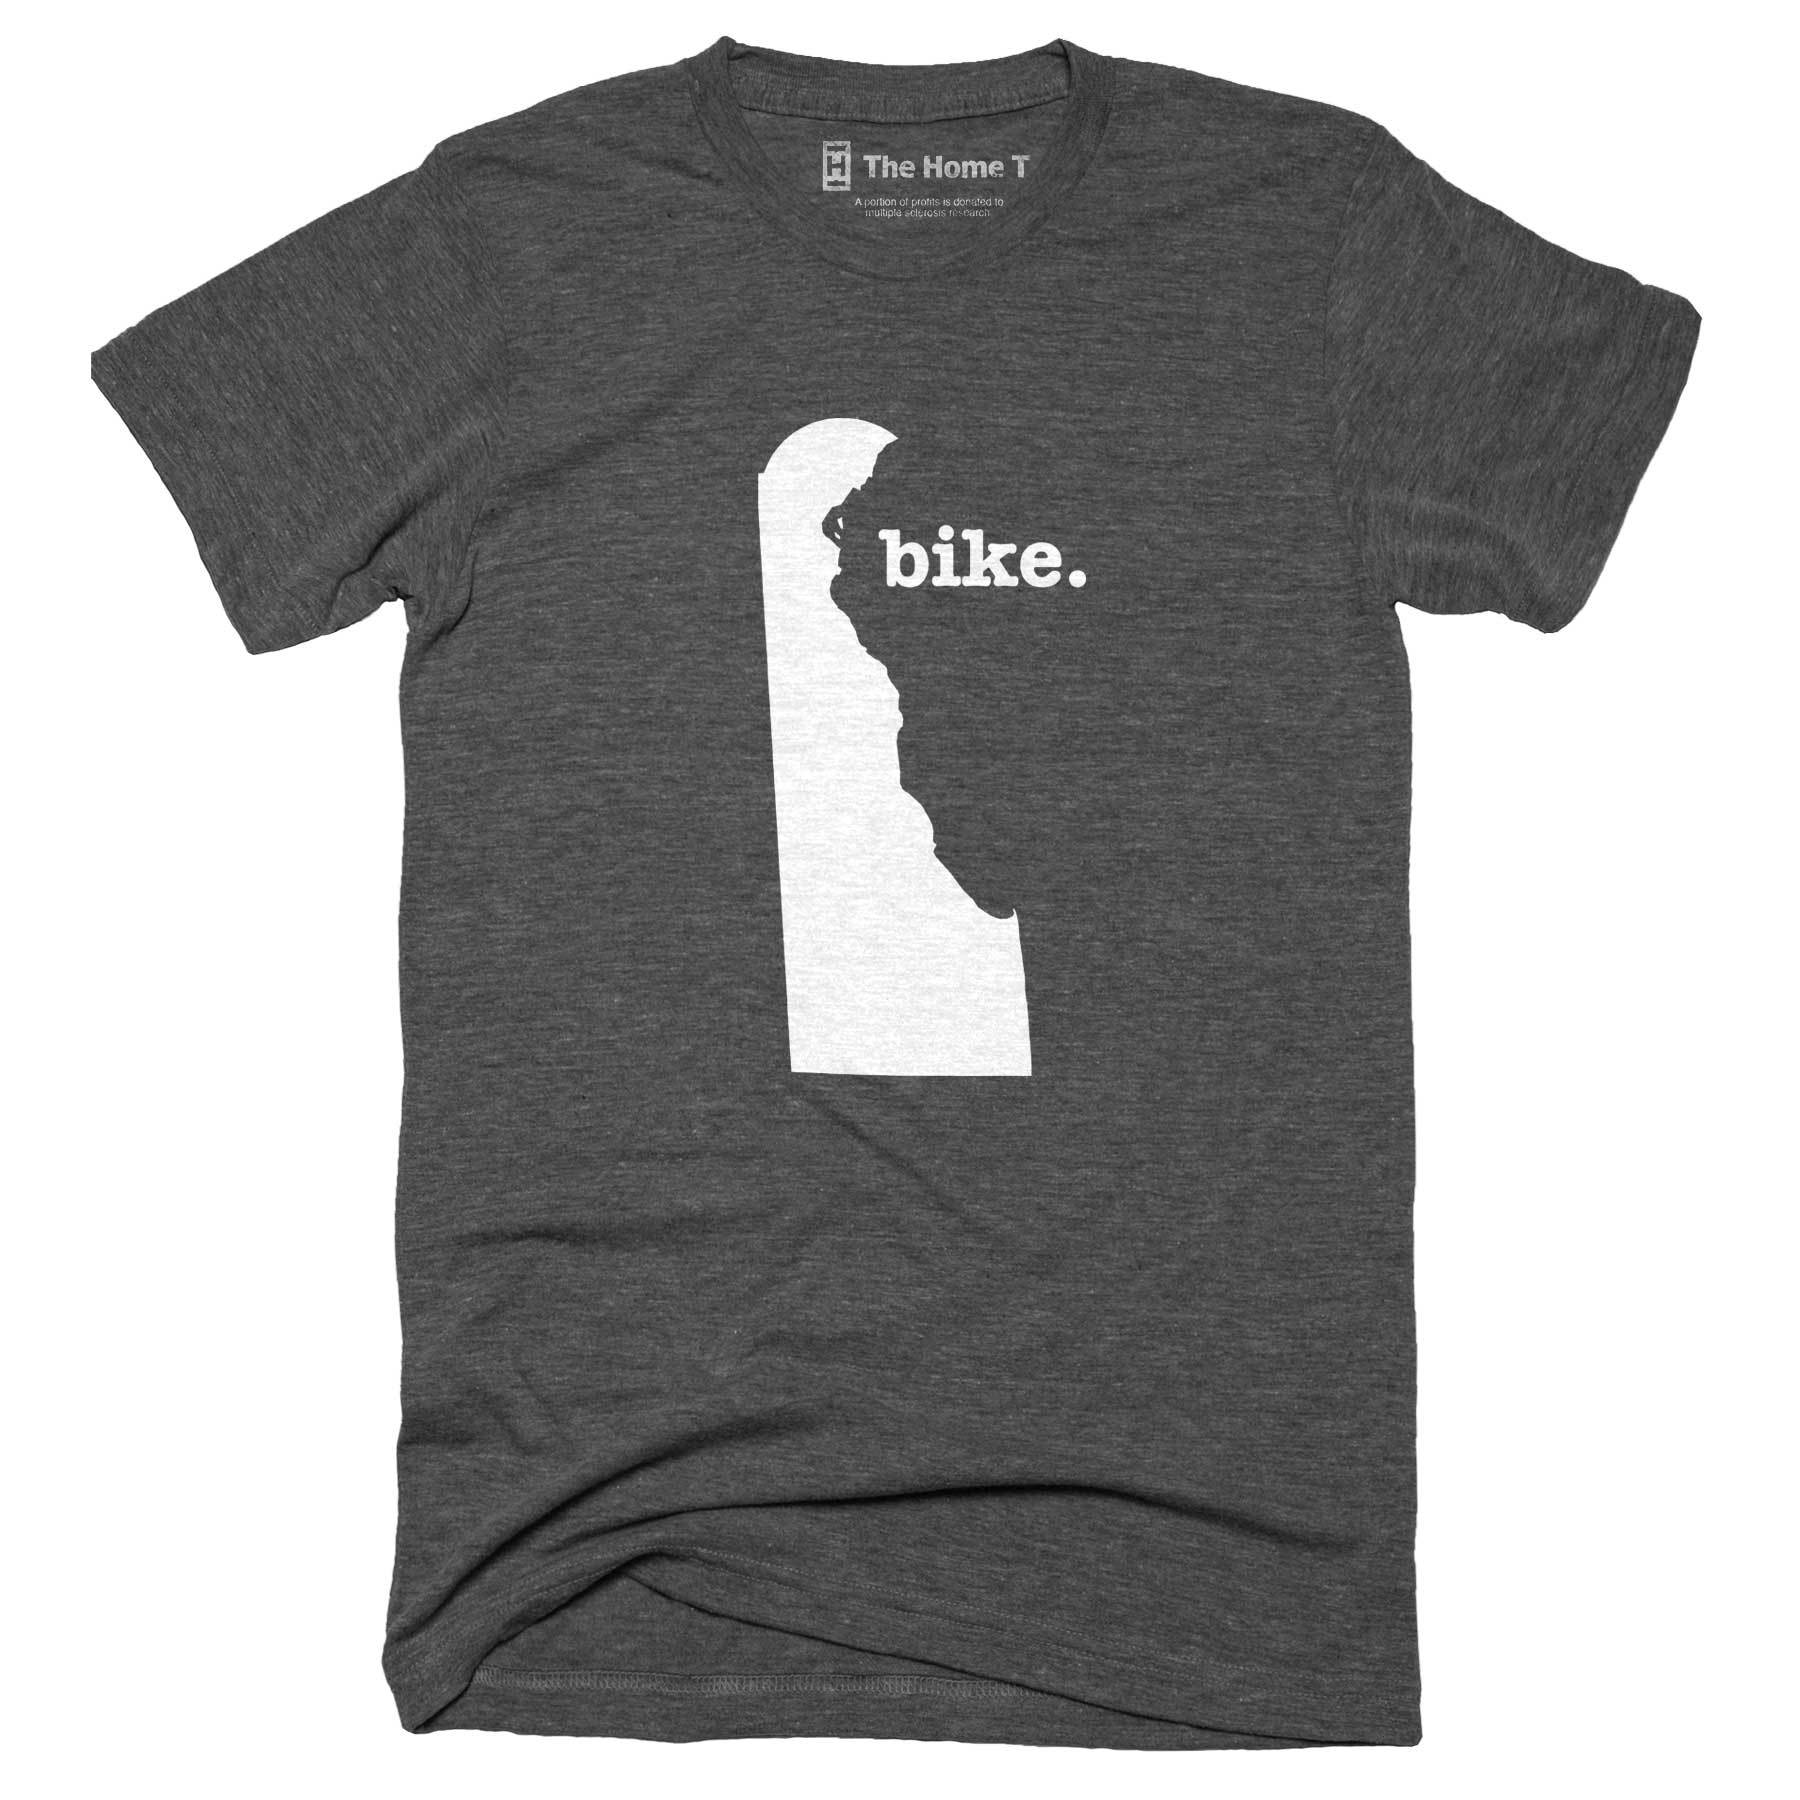 Delaware Bike Home T-Shirt Outdoor Collection The Home T XS Grey